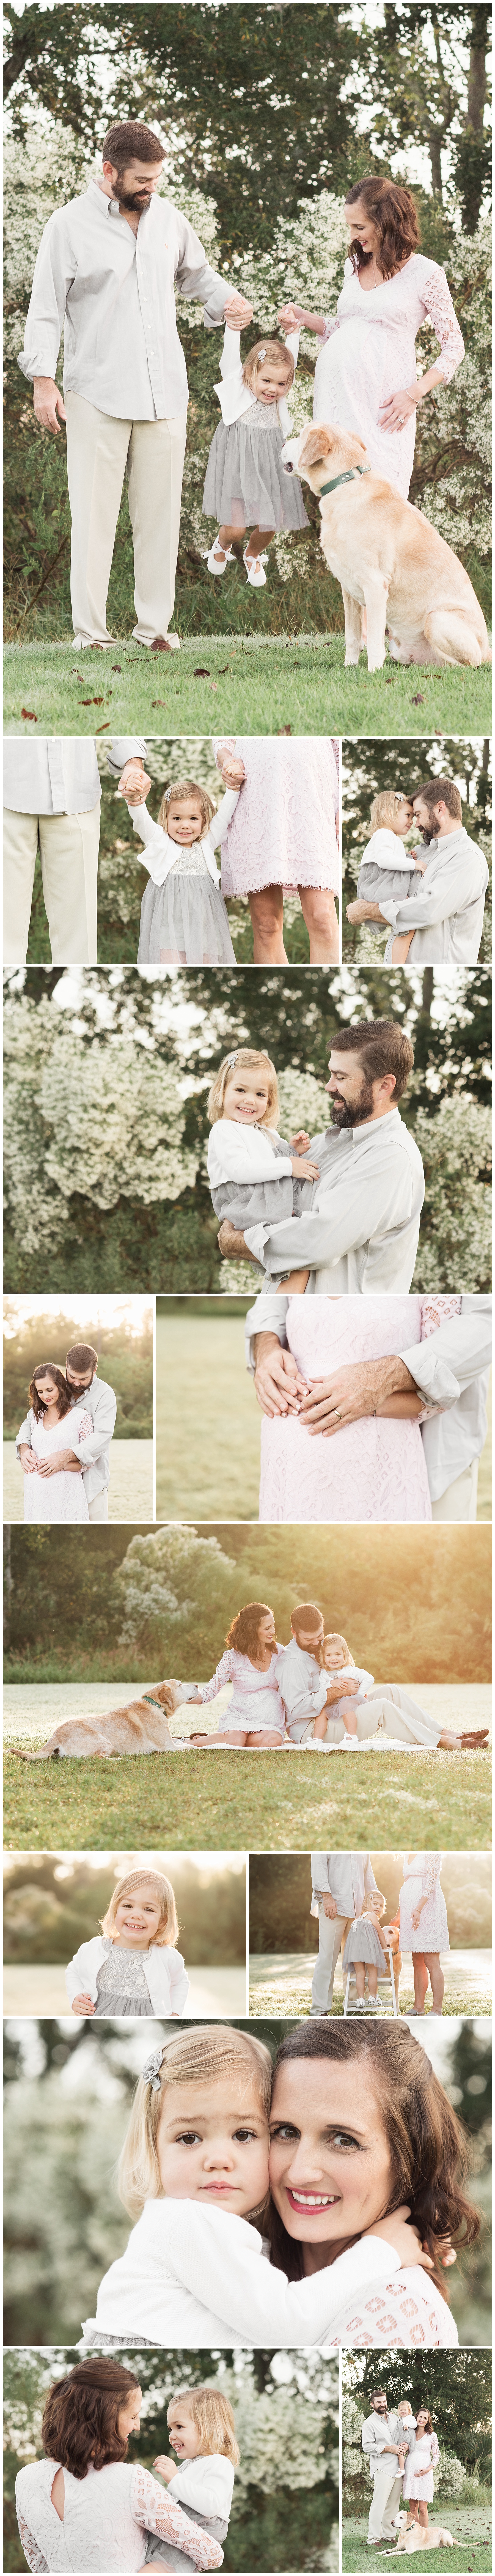 Sunrise maternity photography Houston with toddler and lab